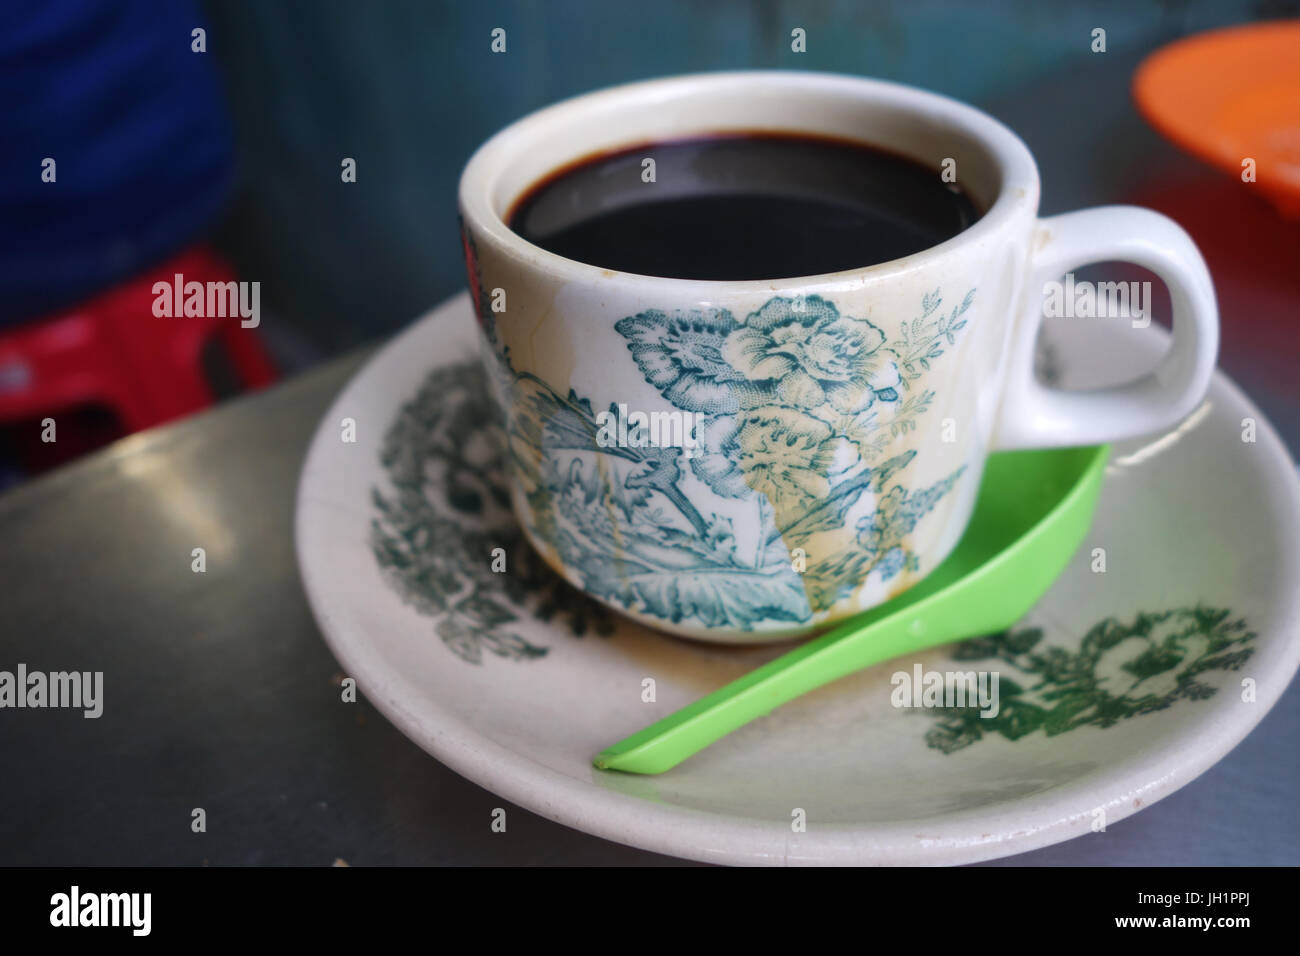 Steaming traditional oriental Chinese kopitiam style dark coffee in vintage mug and saucer Stock Photo